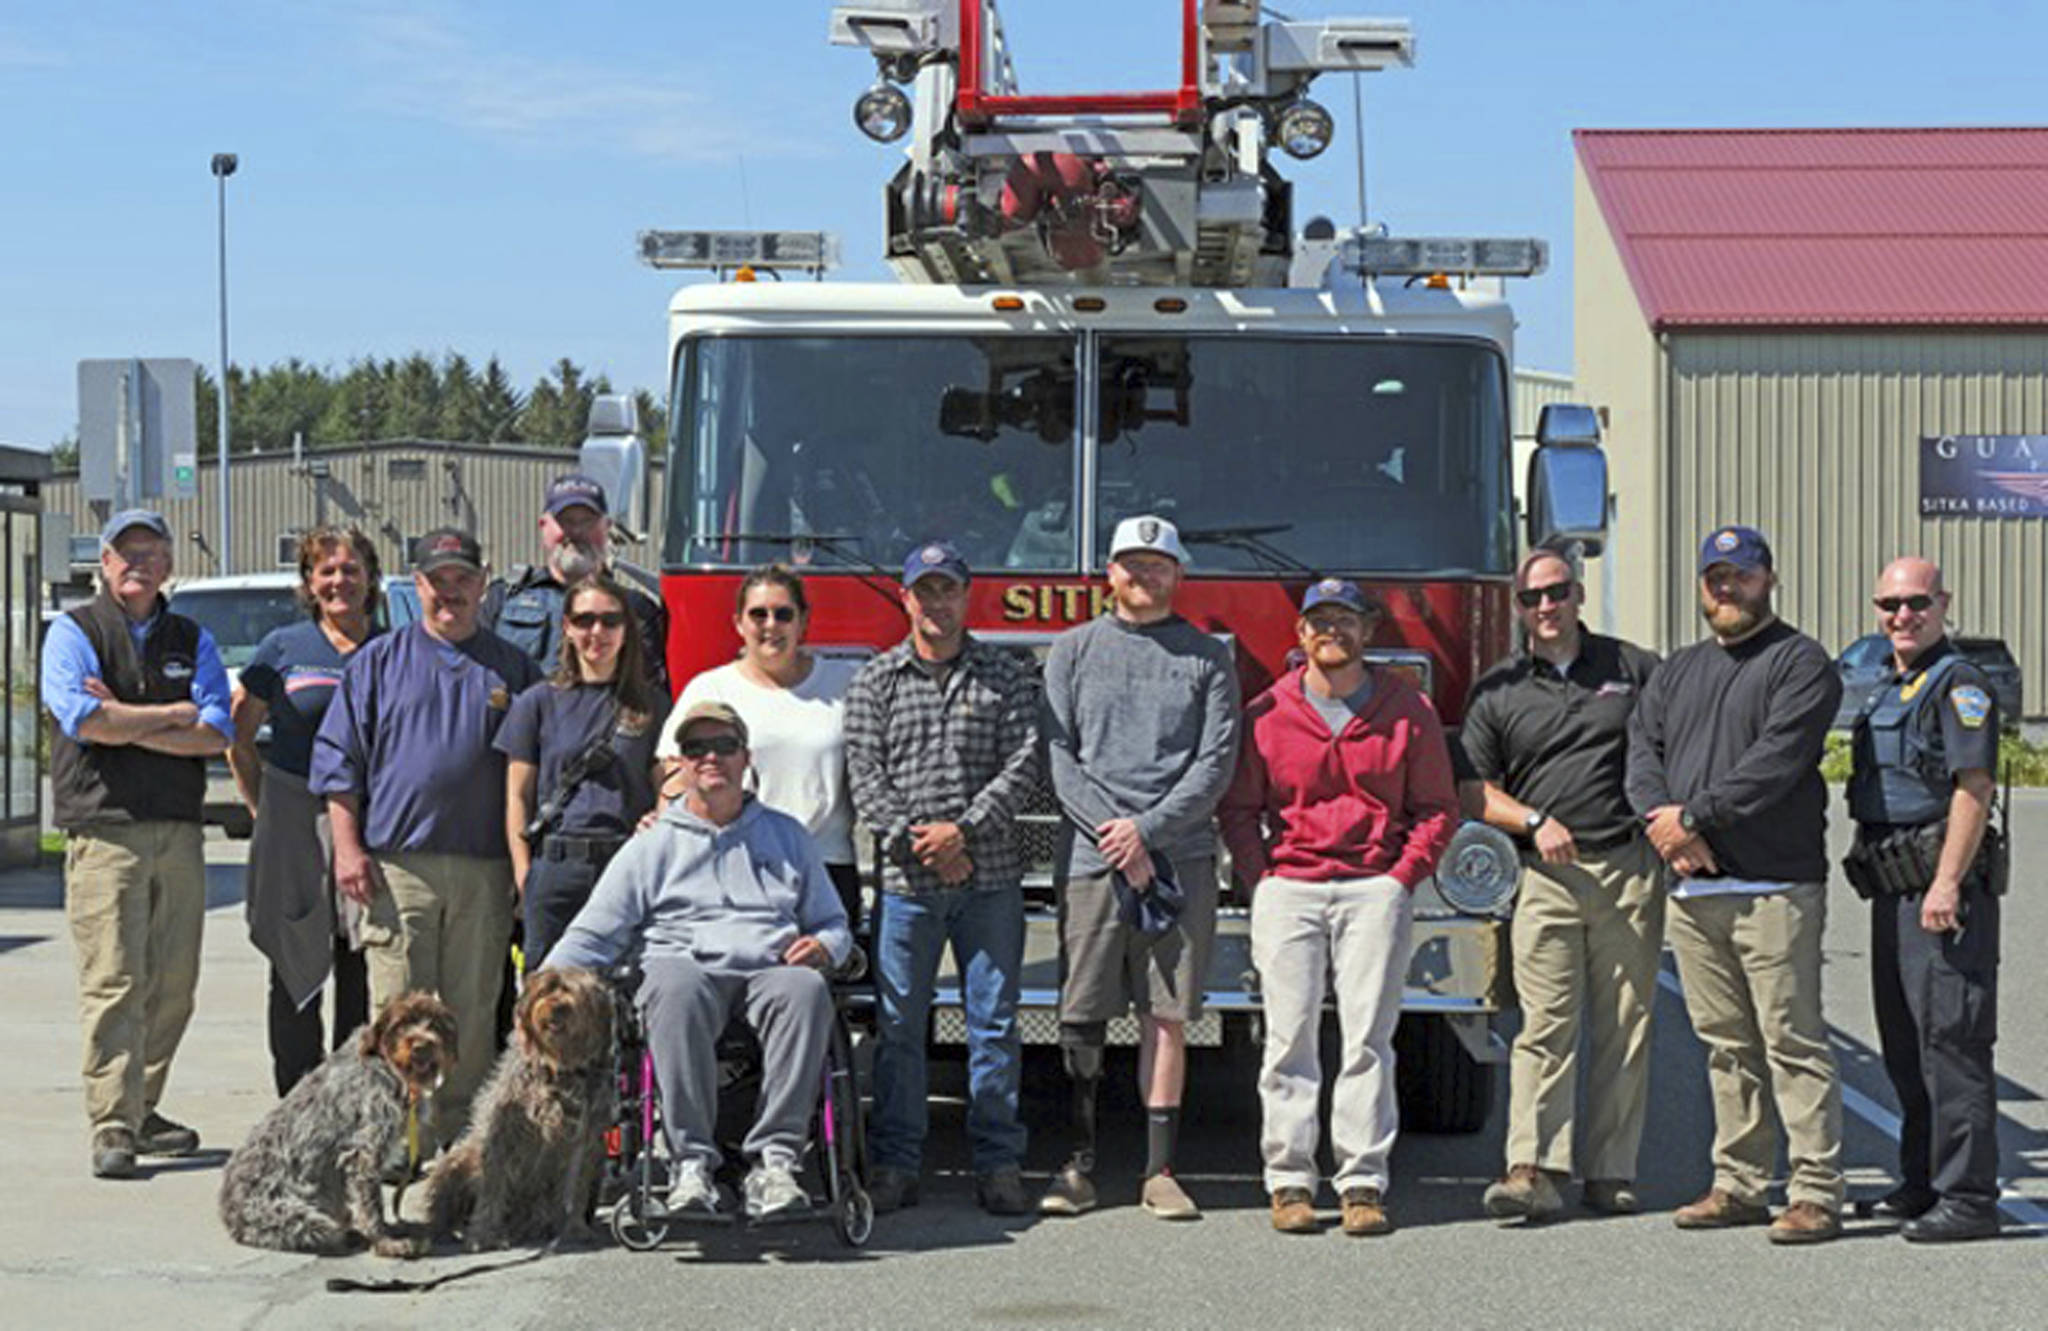 In this Saturday, May 25 photo, military veterans from Freedom Alliance are greeted at the Sitka airport by local fire and police personnel as they start a week of adventure at Vonnie’s Charters and Halibut Point Lodge. Often overlooked in conflicts that occur thousands of miles away on continents most people see just on social media, are the military veterans who return to their non-service lives with traumas both visible and unseen. A local fishing charter business, working with a veteran support organization called Freedom Alliance, has been reaching out to these veterans over the past several years, giving them a taste of all that Alaska has to offer. (Klas Stolpe | Sitka Sentinel via AP)